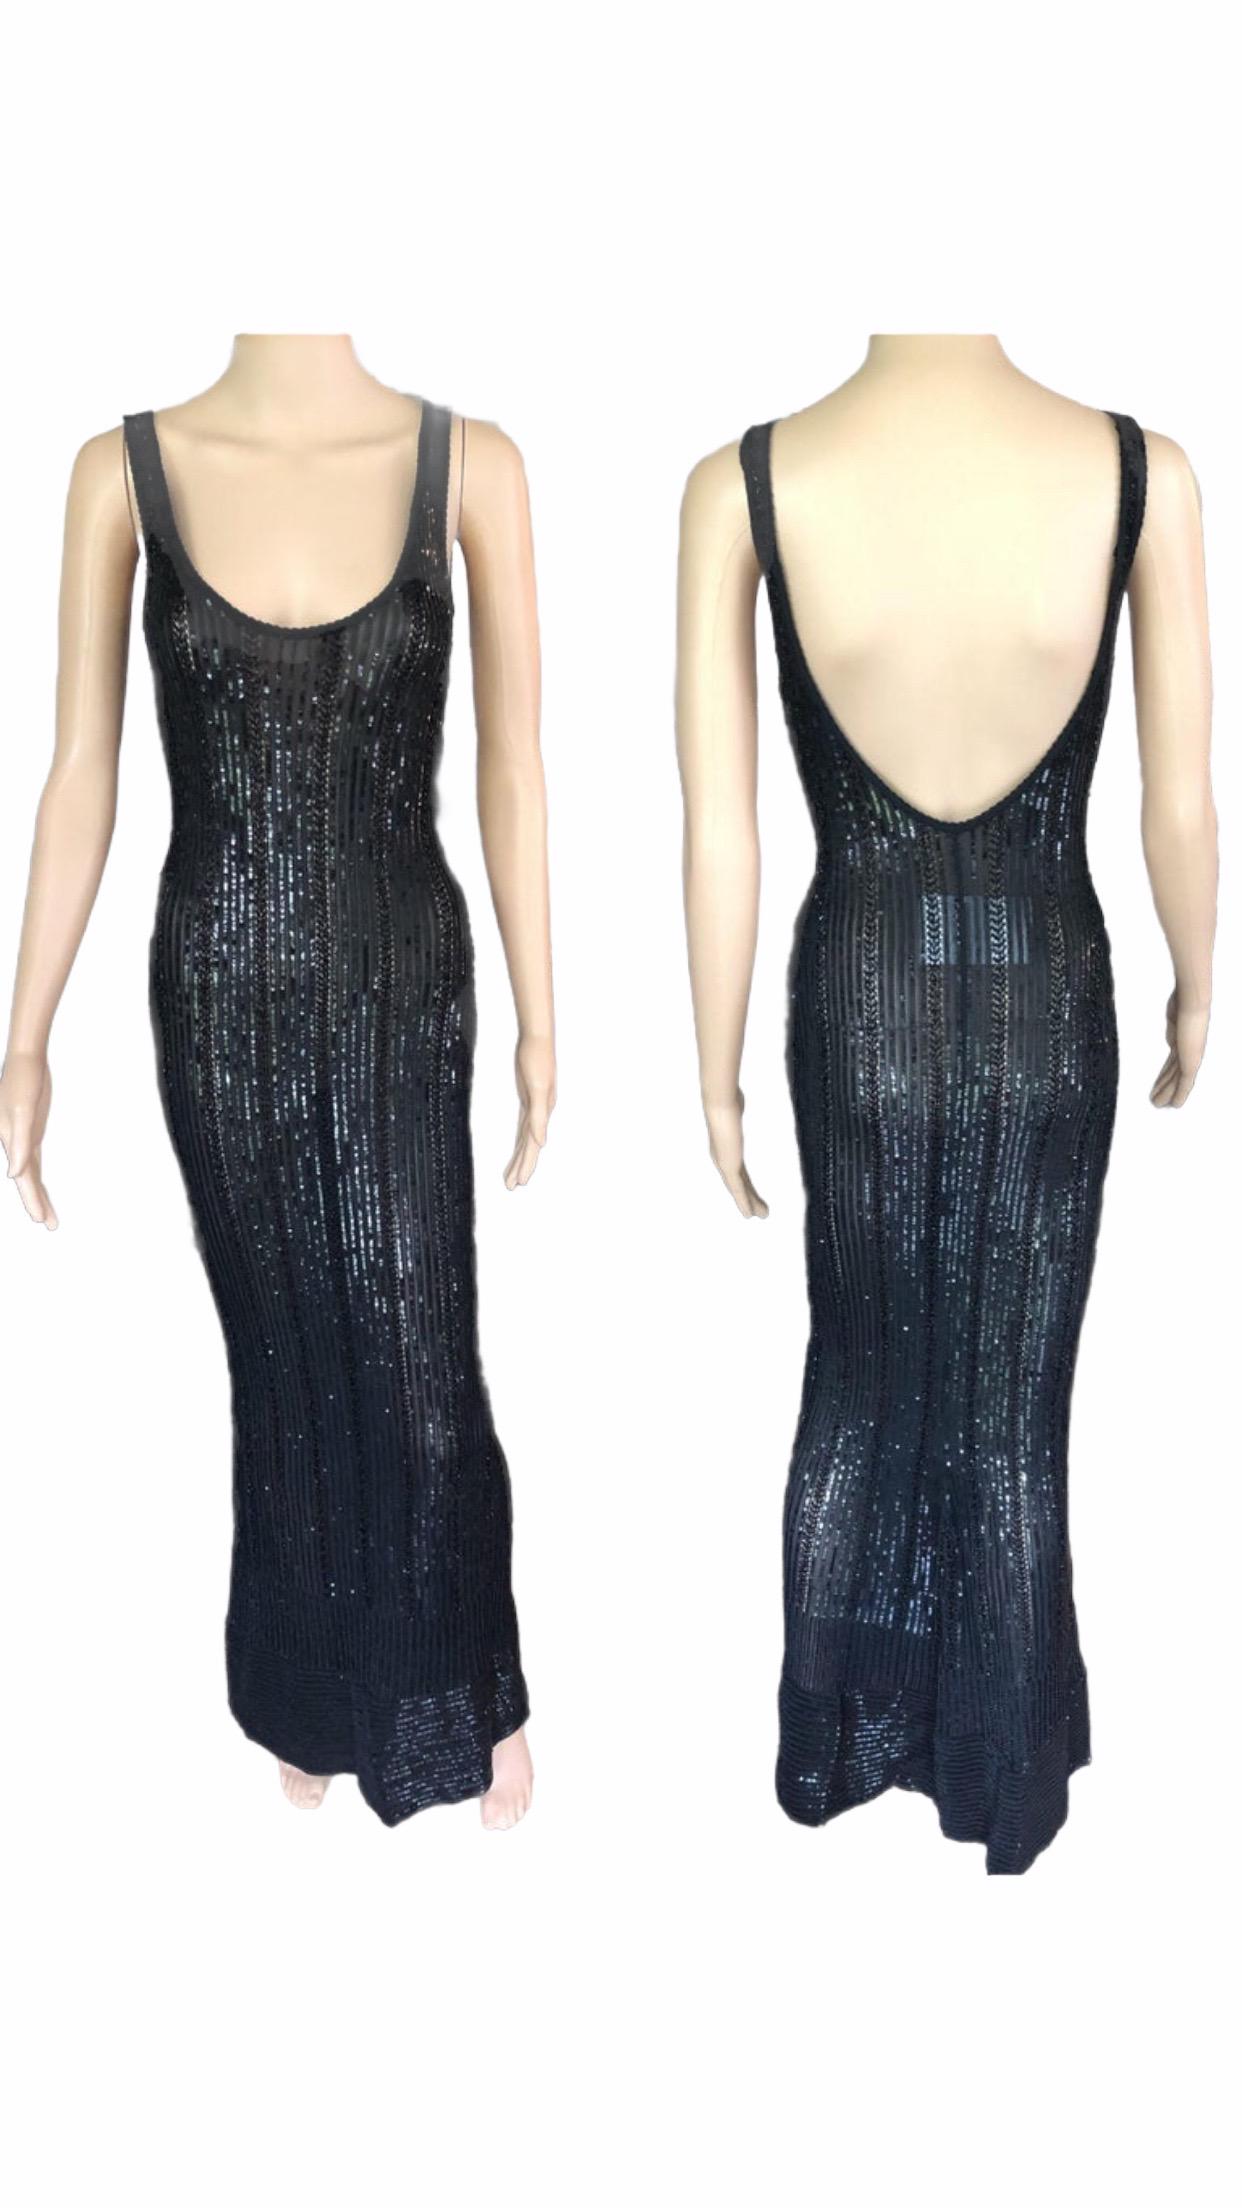 Azzedine Alaia Vintage S/S 1996 Runway Black Sequin Embellished Dress Gown 6